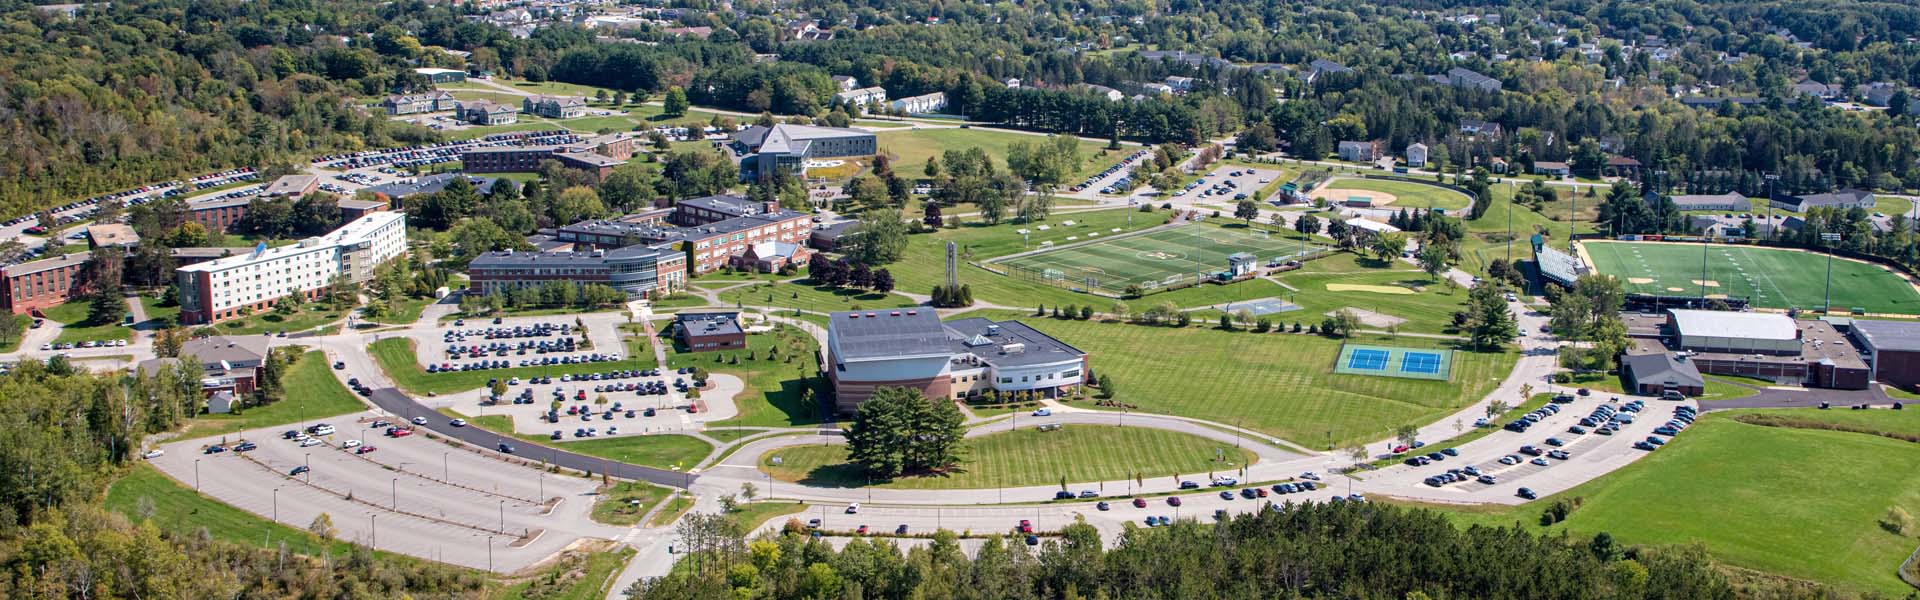 An aerial view of the Husson University campus